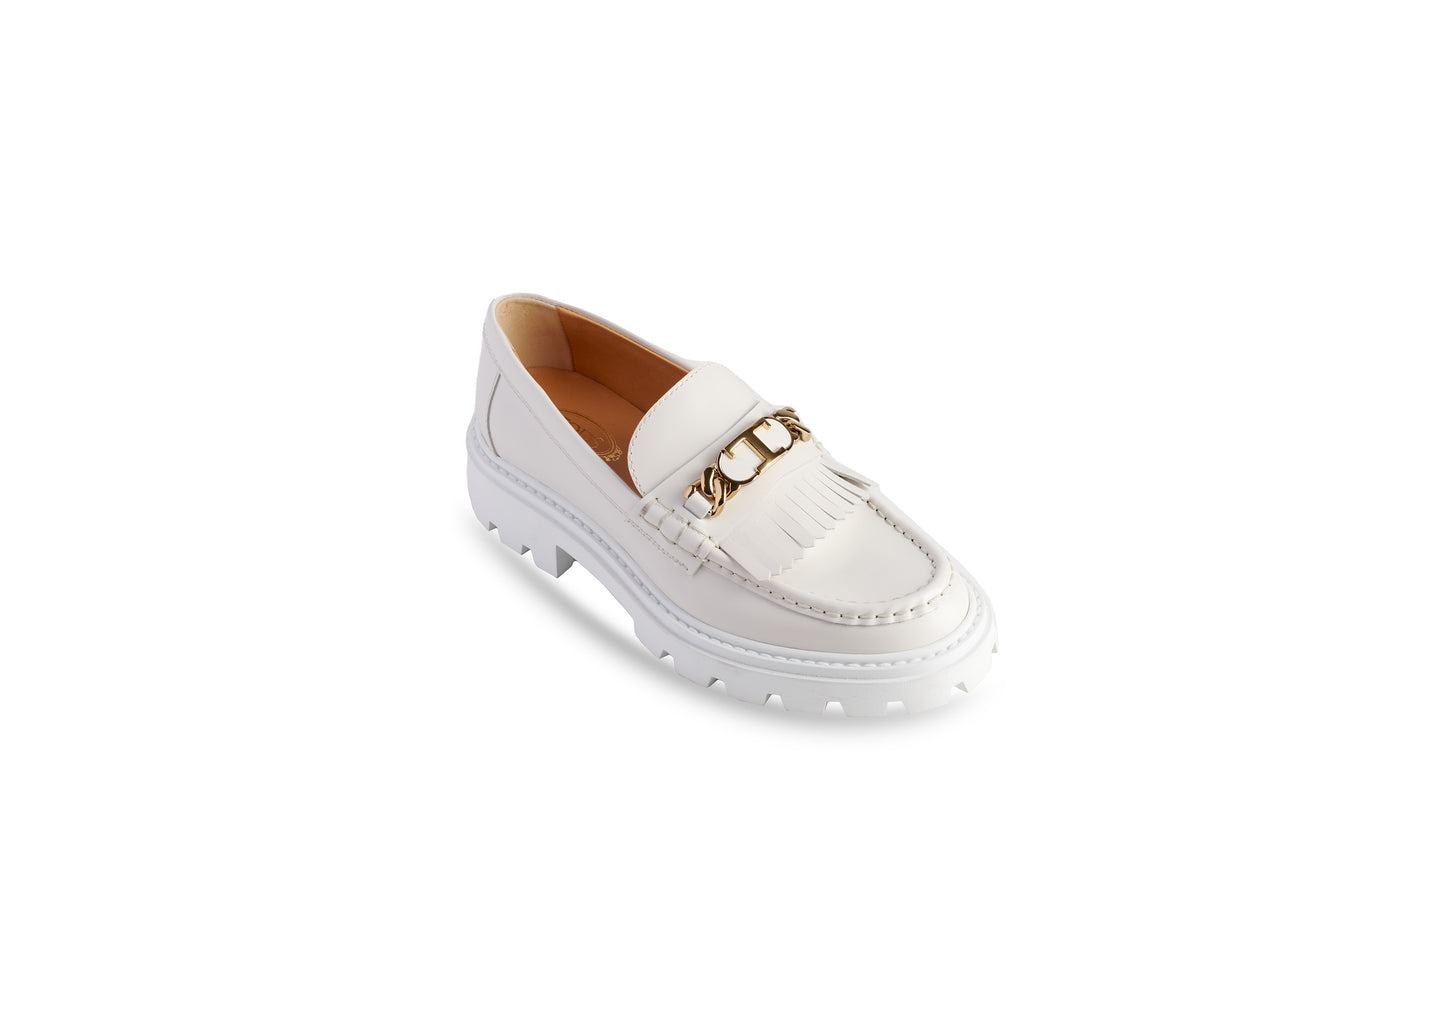 Fringed Platform Loafer Leather White - more sizes coming soon